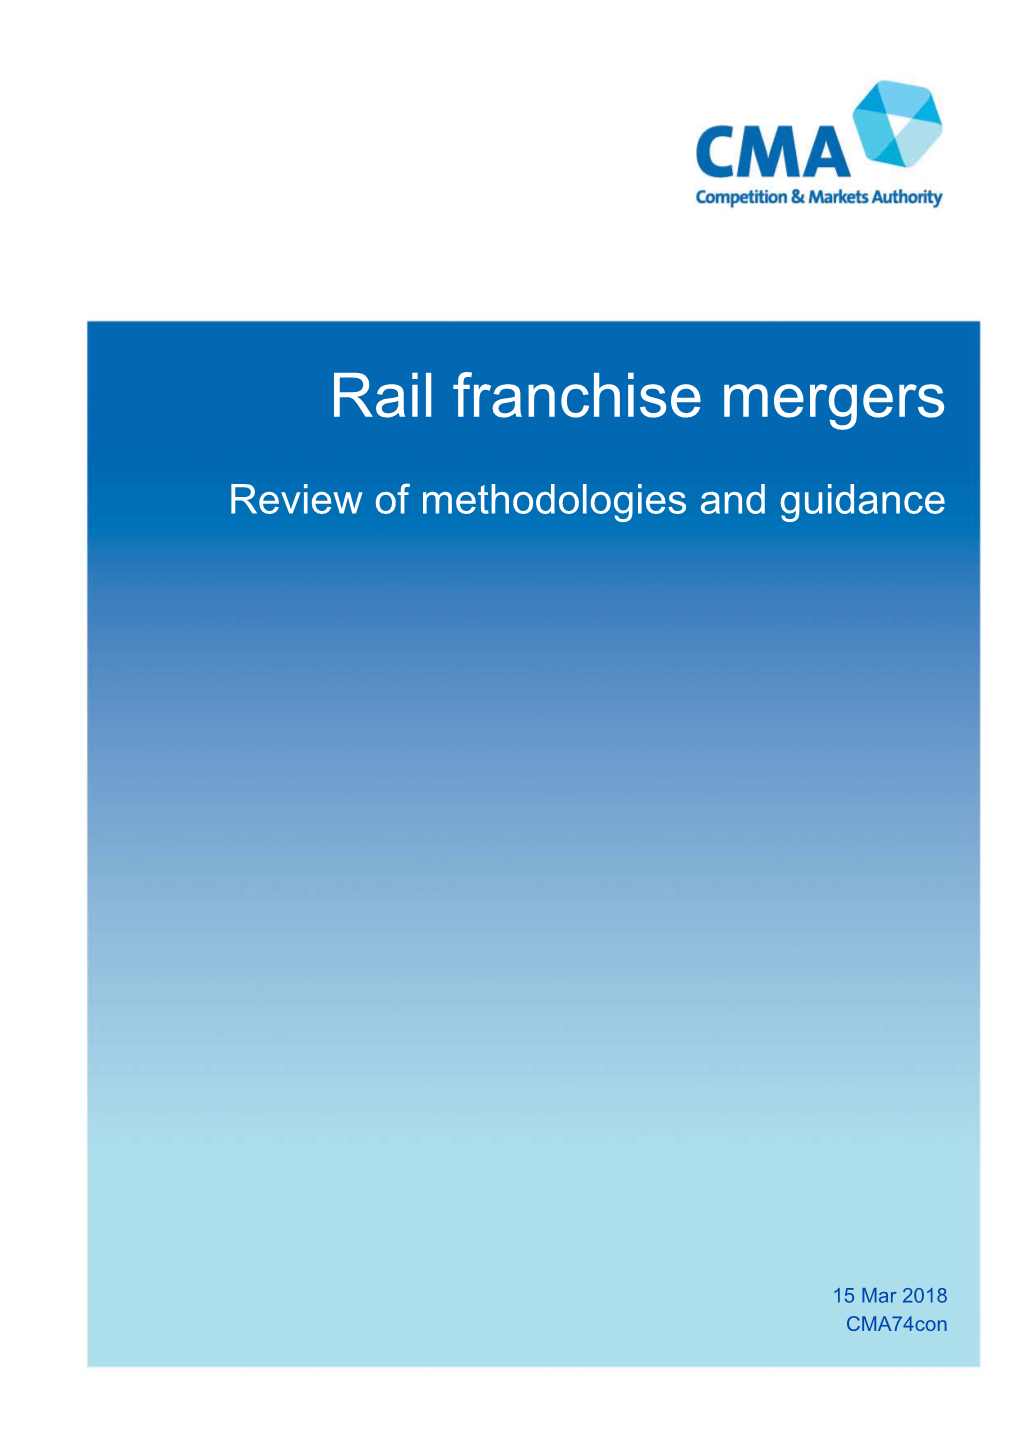 Rail Franchise Mergers: Review of Methodologies and Guidance